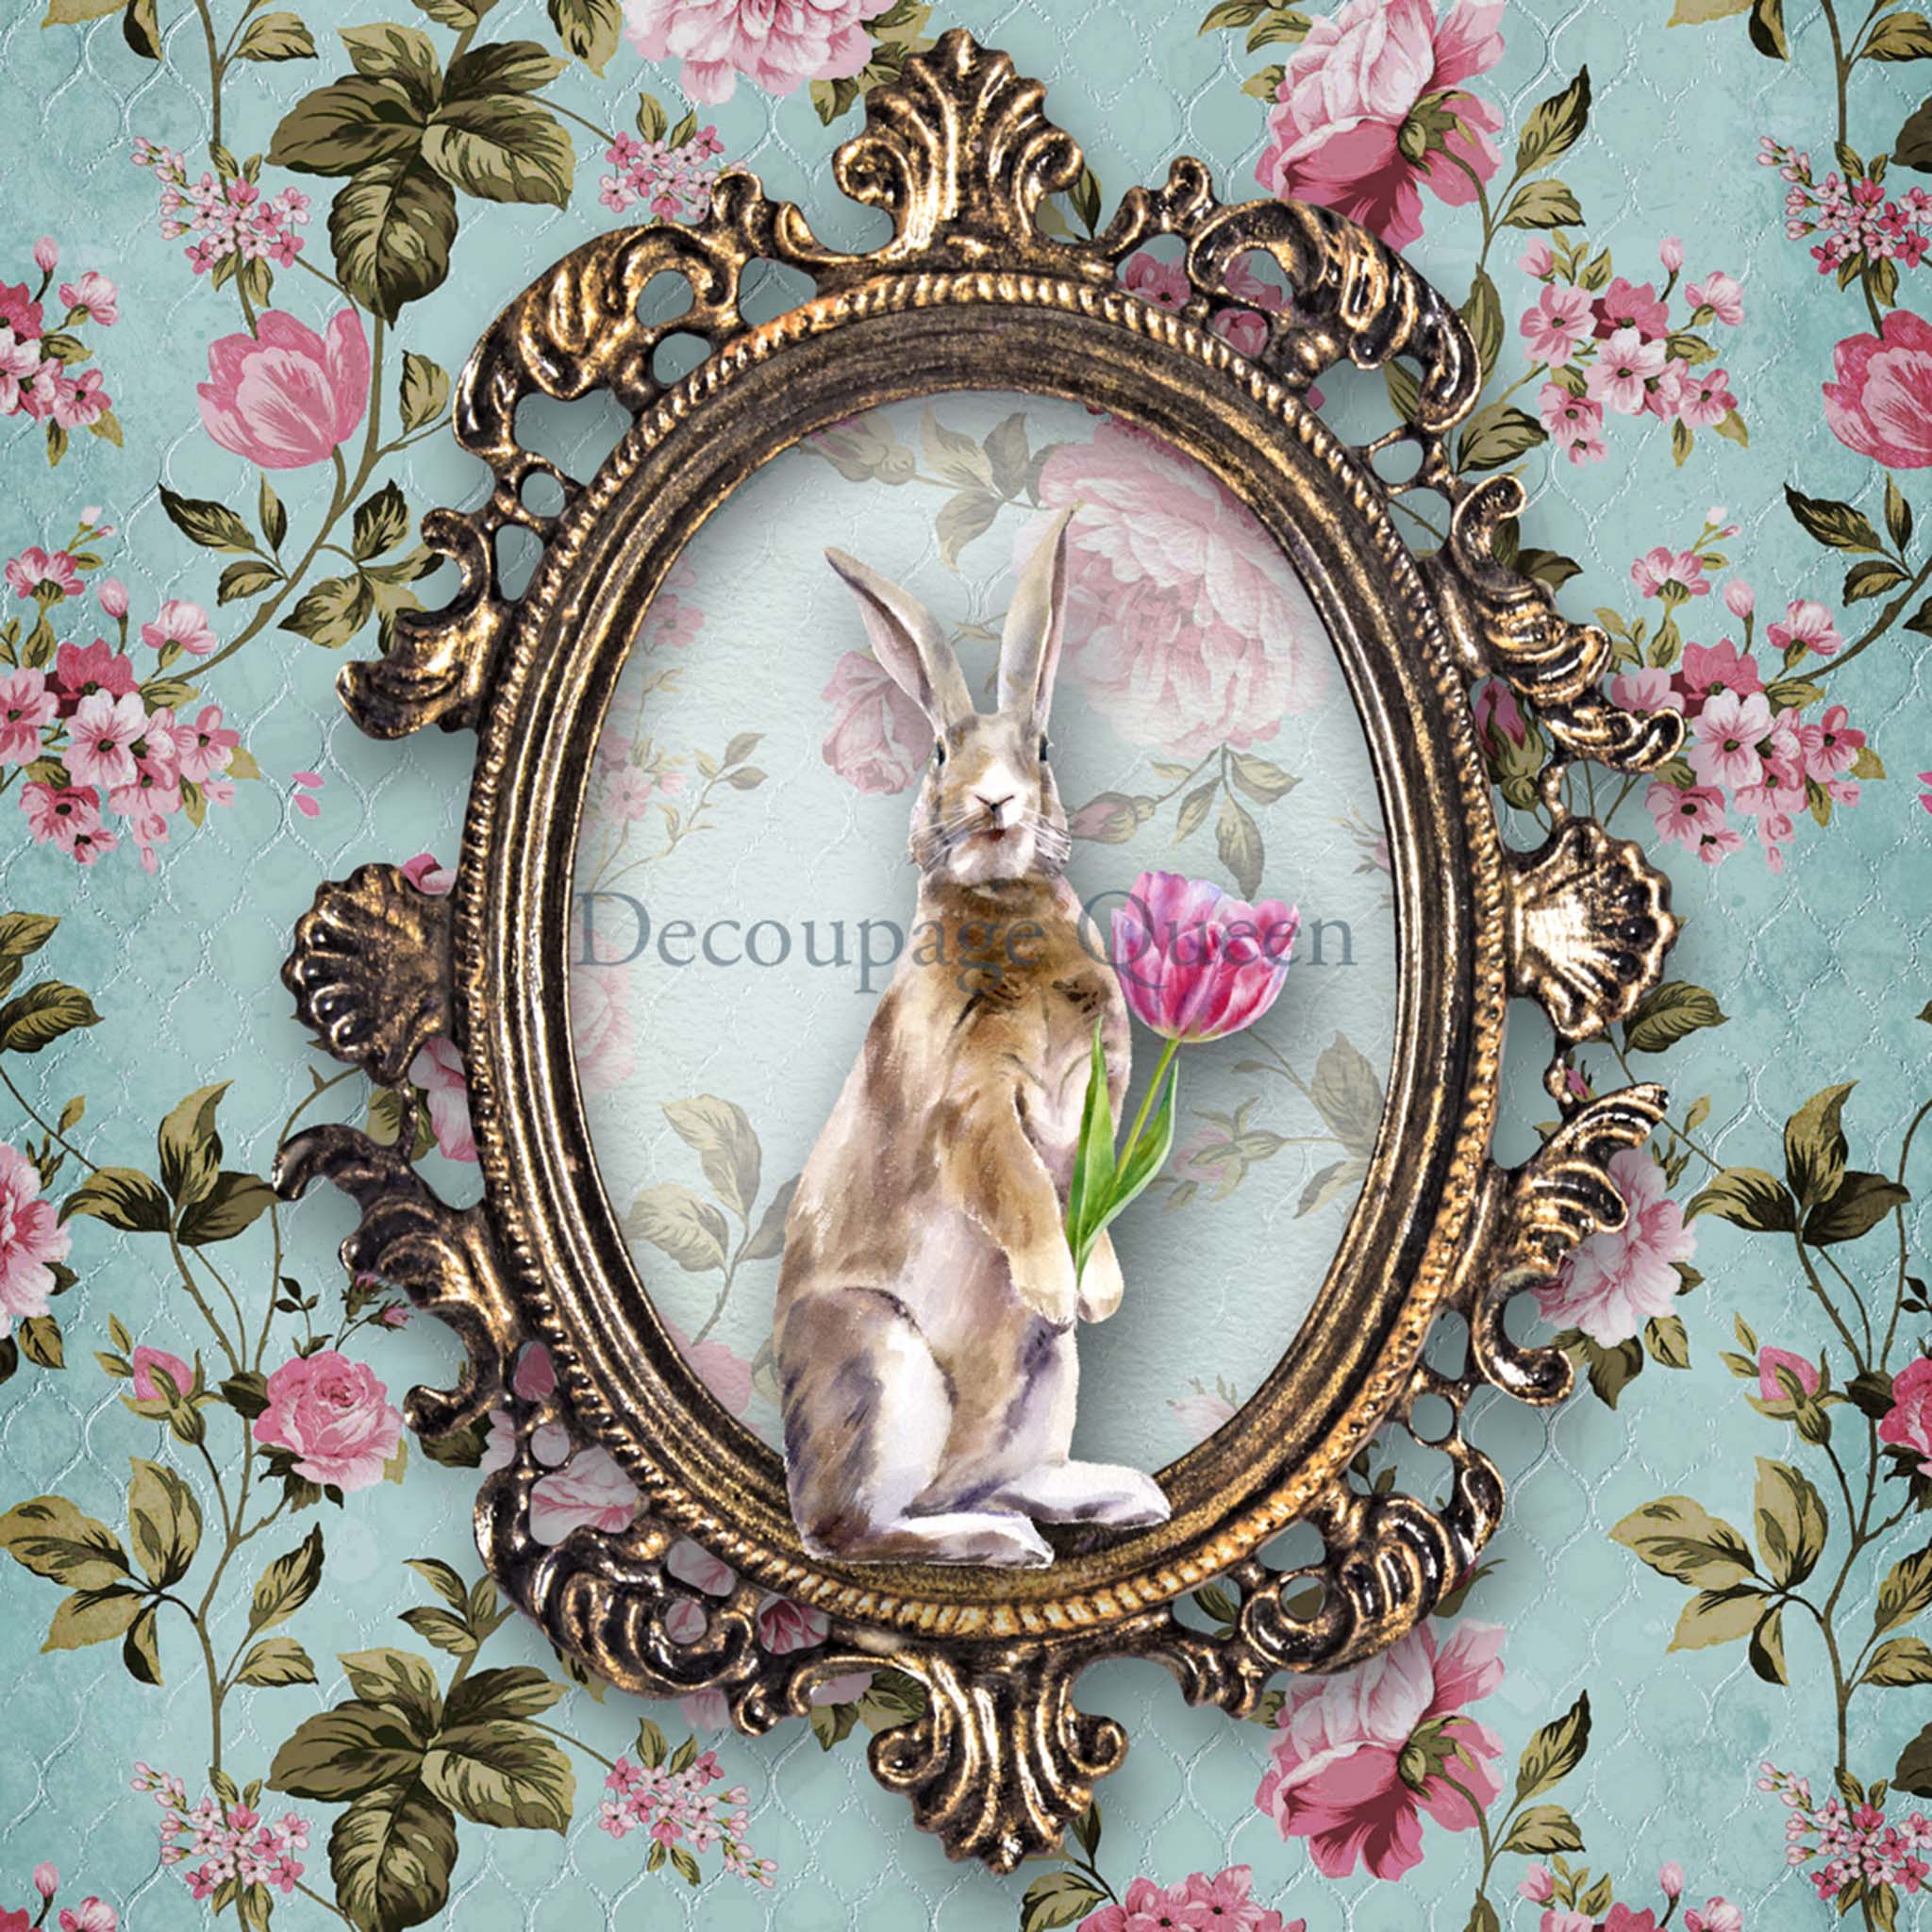 Close-up of an A4 rice paper design that features a charming brown bunny holding a tulip in an ornate frame, surrounded by pink flowers on an aqua background.